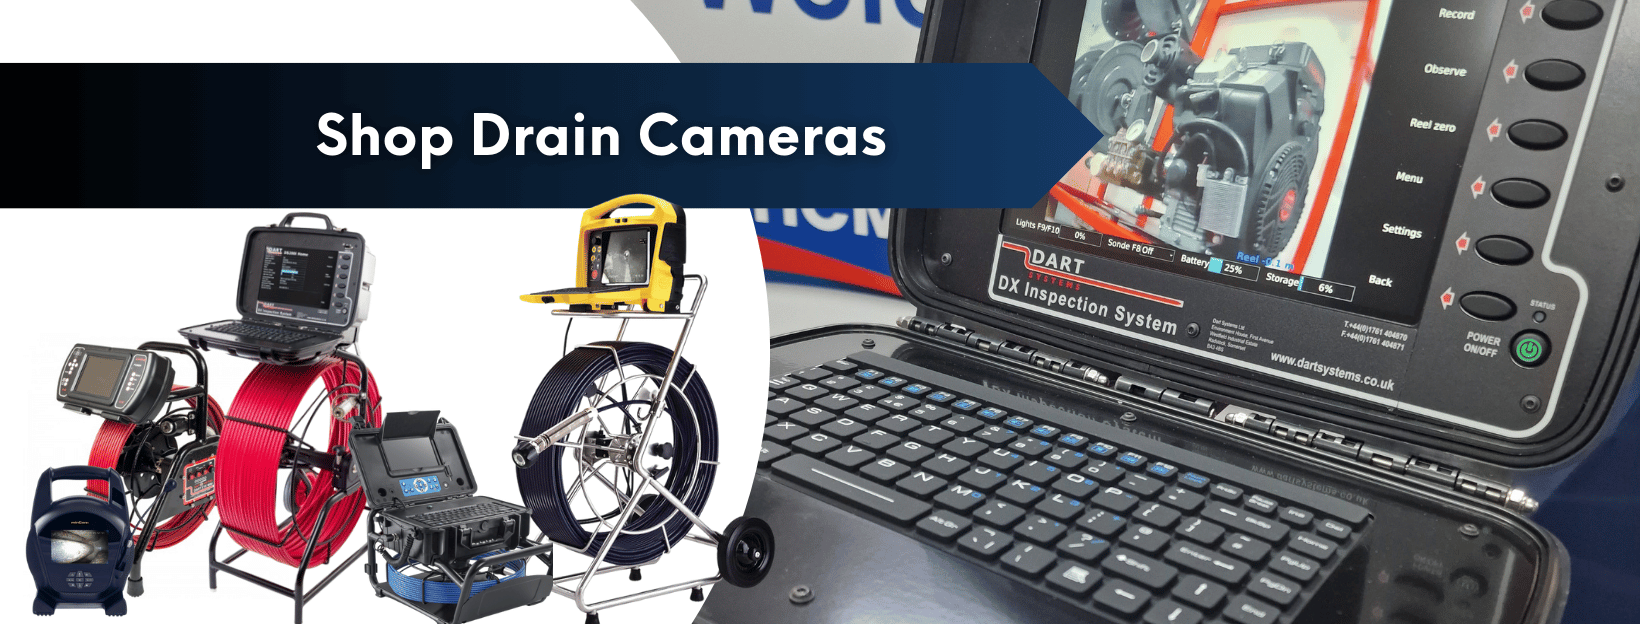 large featured image of multiple drain cameras for cctv surveys patch lining and inspection use, small compact cameras to larger models with sonde available to purchase in store and online at HCM Jetters